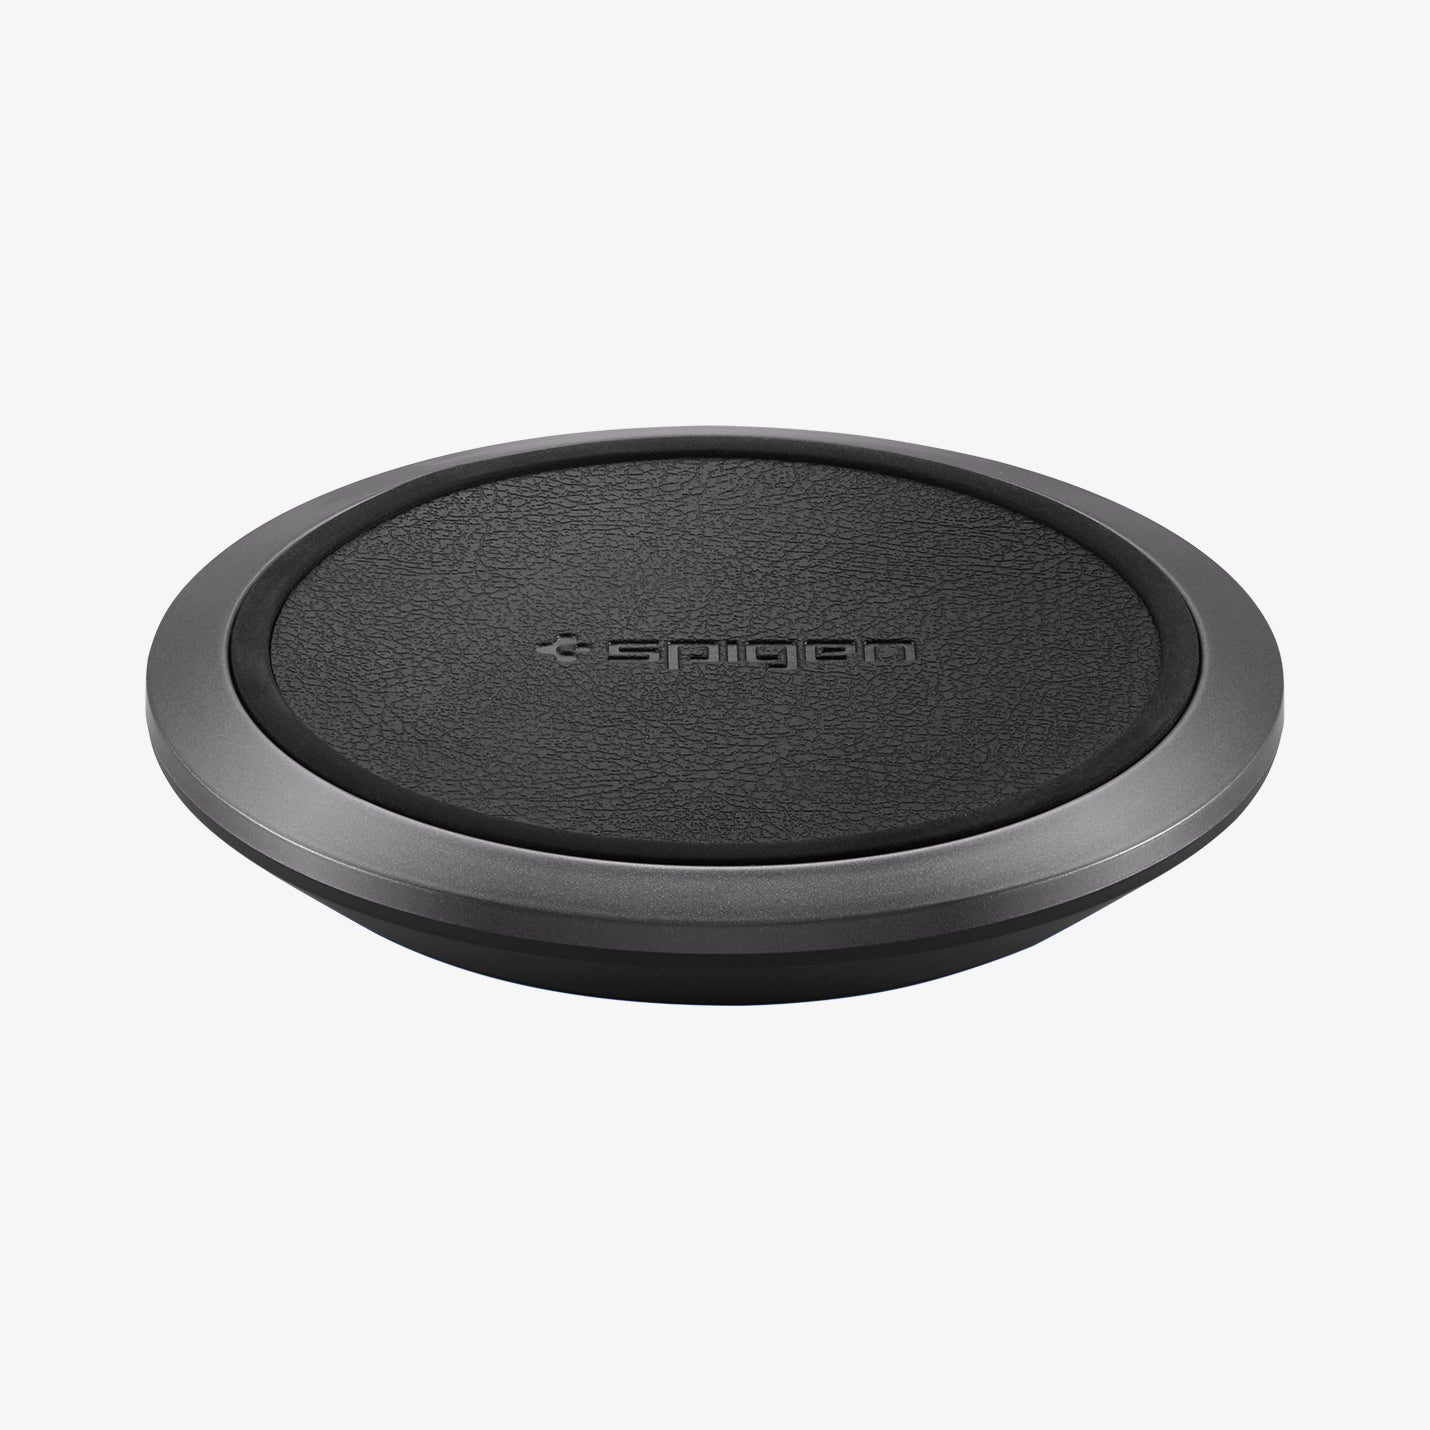 000CH23122 - Essential® Leather Designed 10W Wireless Charger F308W in black showing the front and top